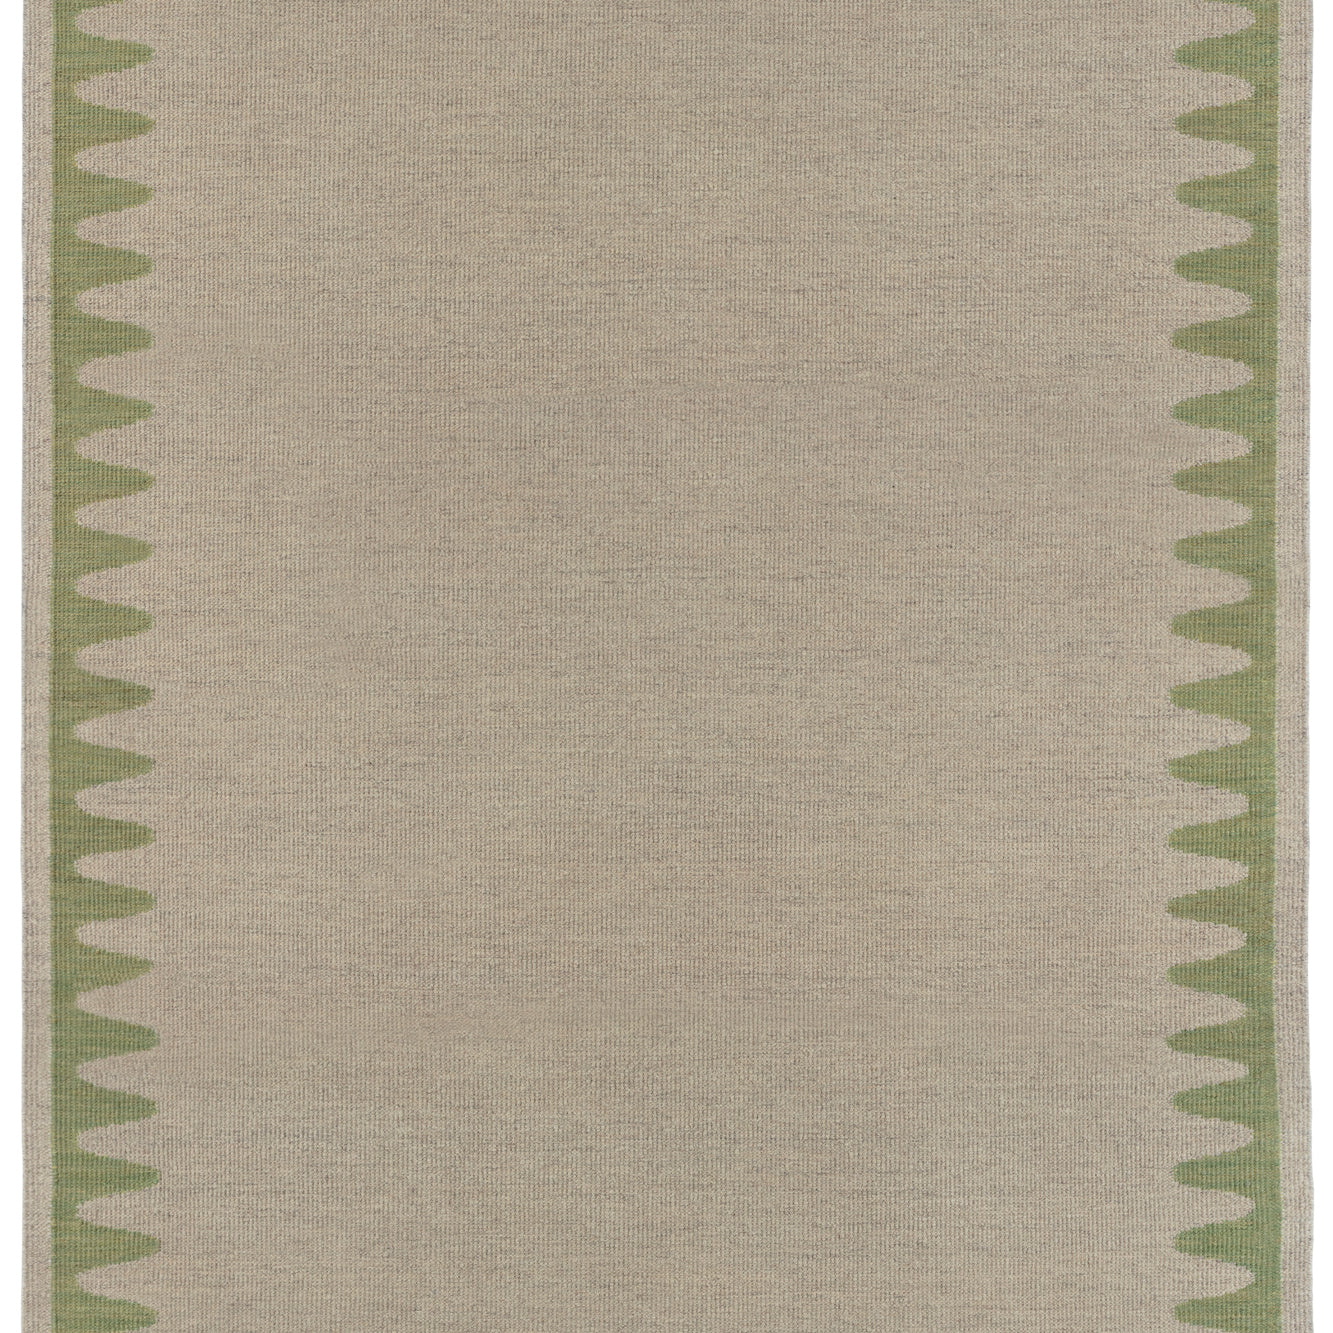 Waver Rug in Sage, a strated taupe field with a sage green flame stitch border. 